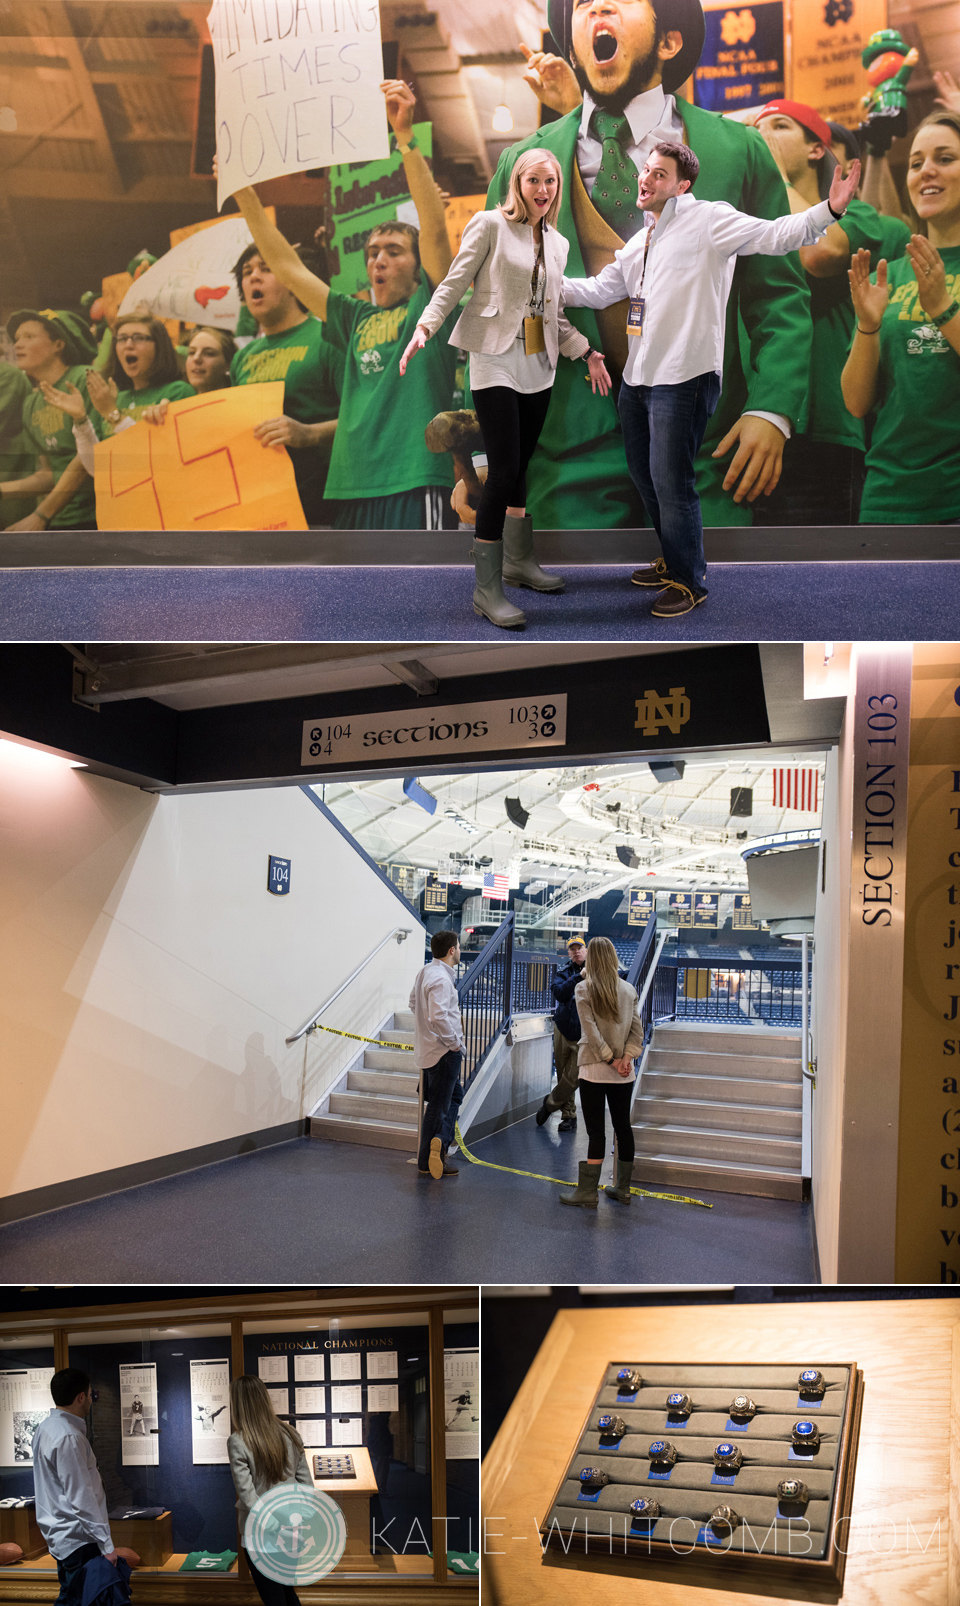 Couple taking a private tour around the Notre Dame athletic facilities after getting engaged